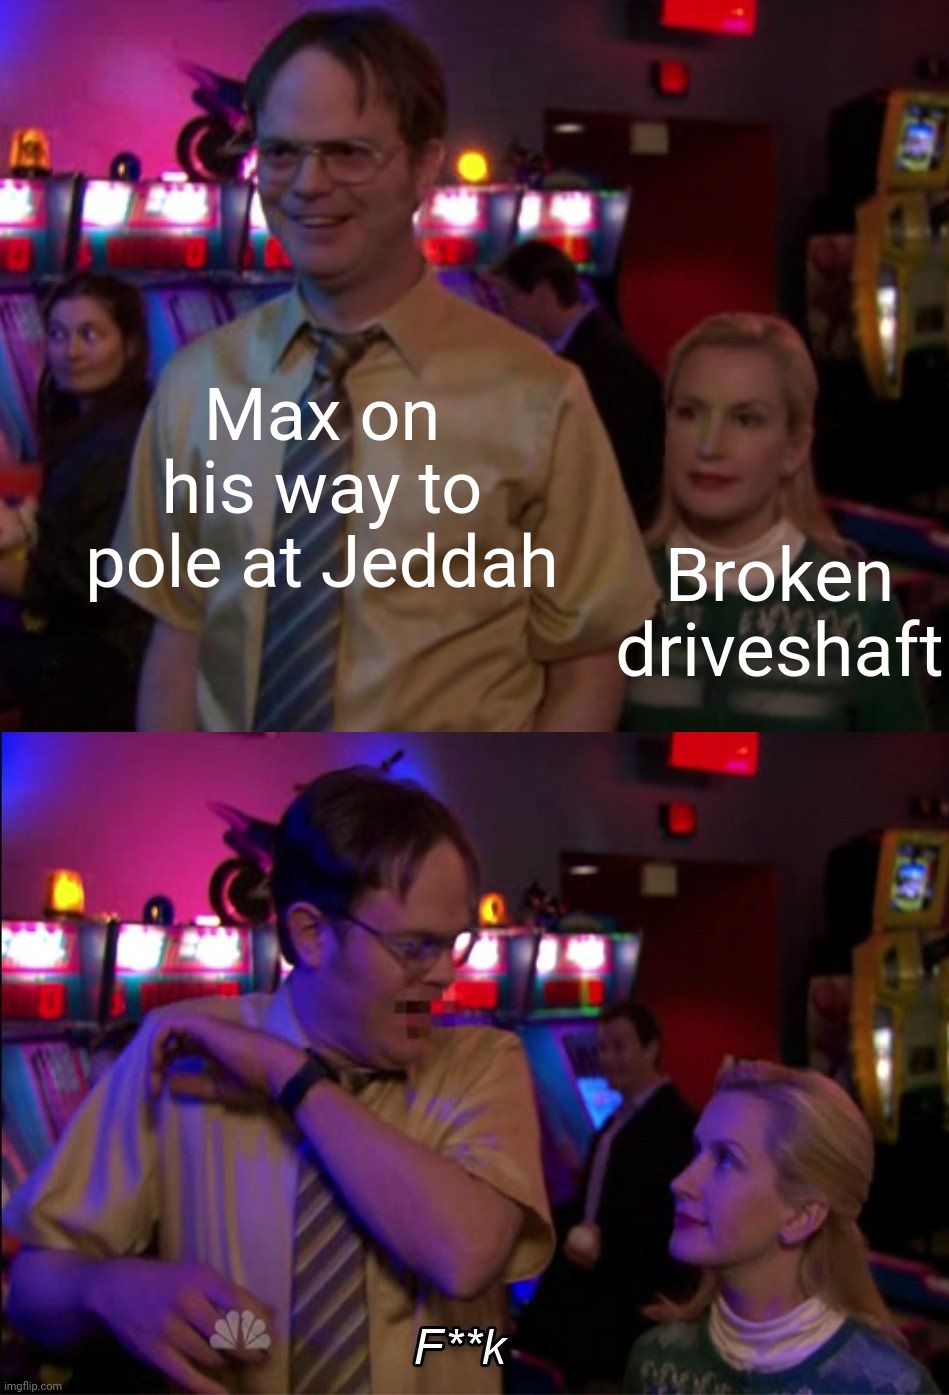 Angela scared Dwight | Max on his way to pole at Jeddah; Broken driveshaft | image tagged in angela scared dwight,formula 1 | made w/ Imgflip meme maker